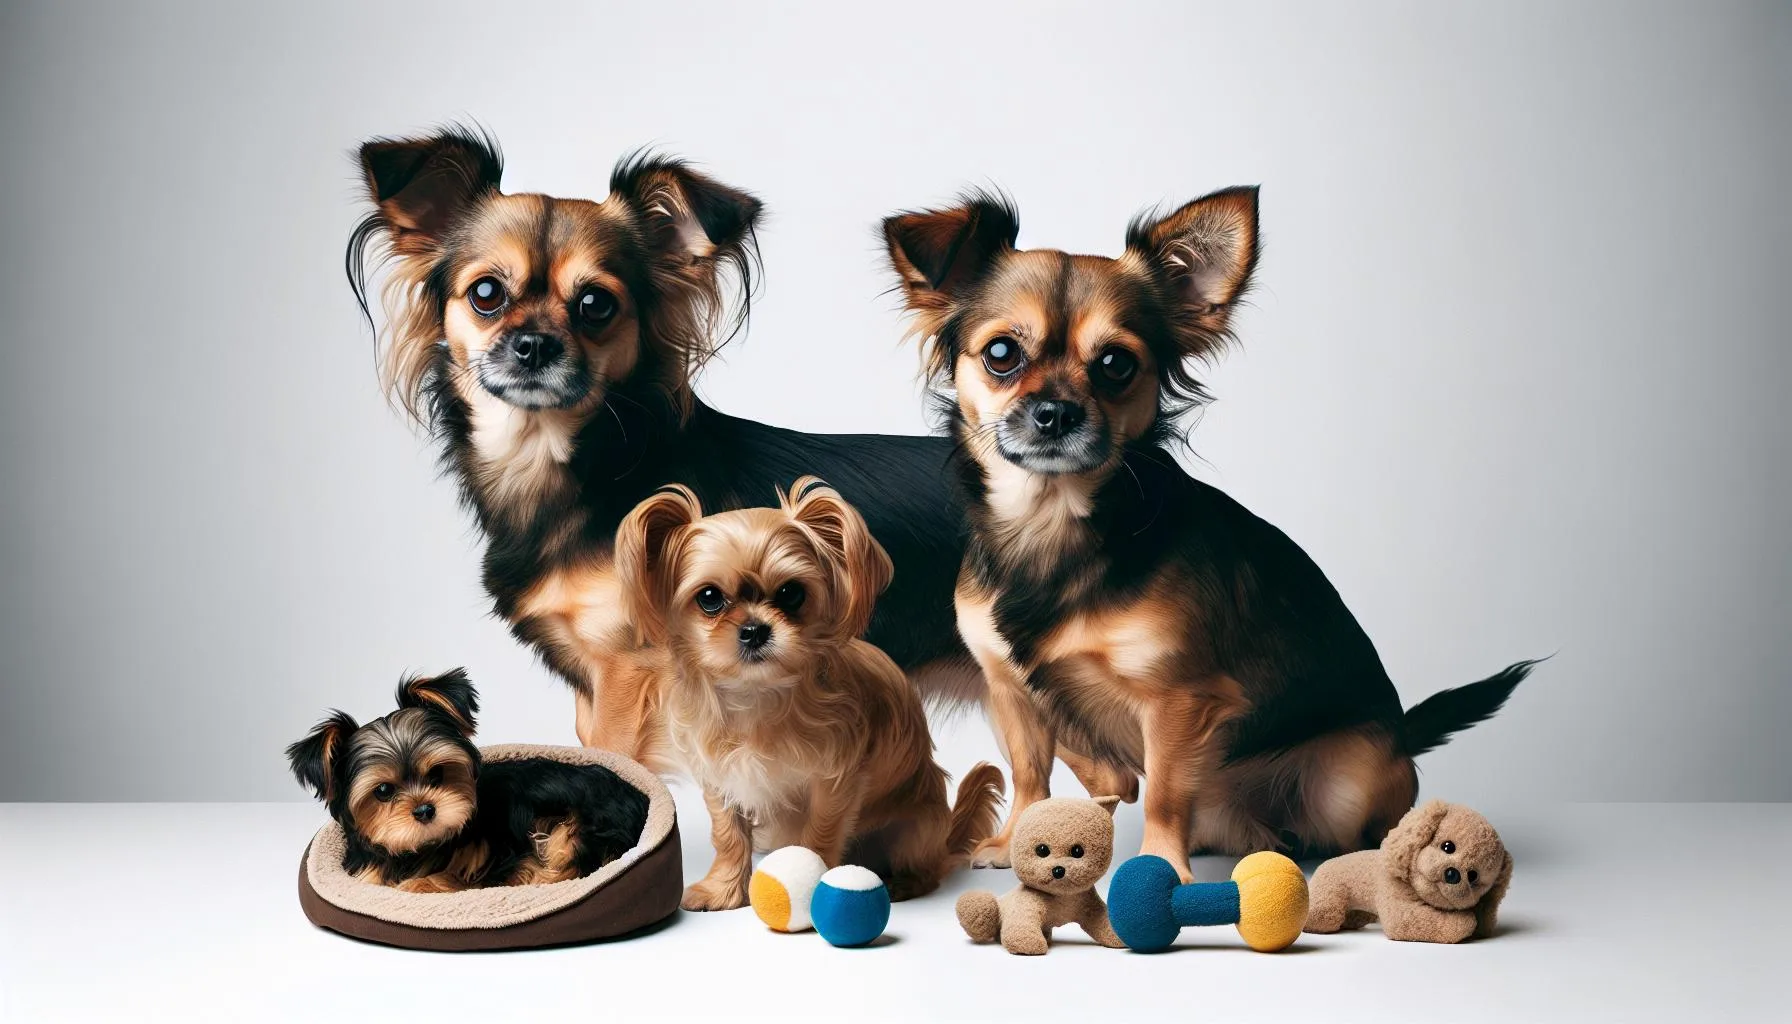 Find your perfect chihuahua yorkie poo mix today!